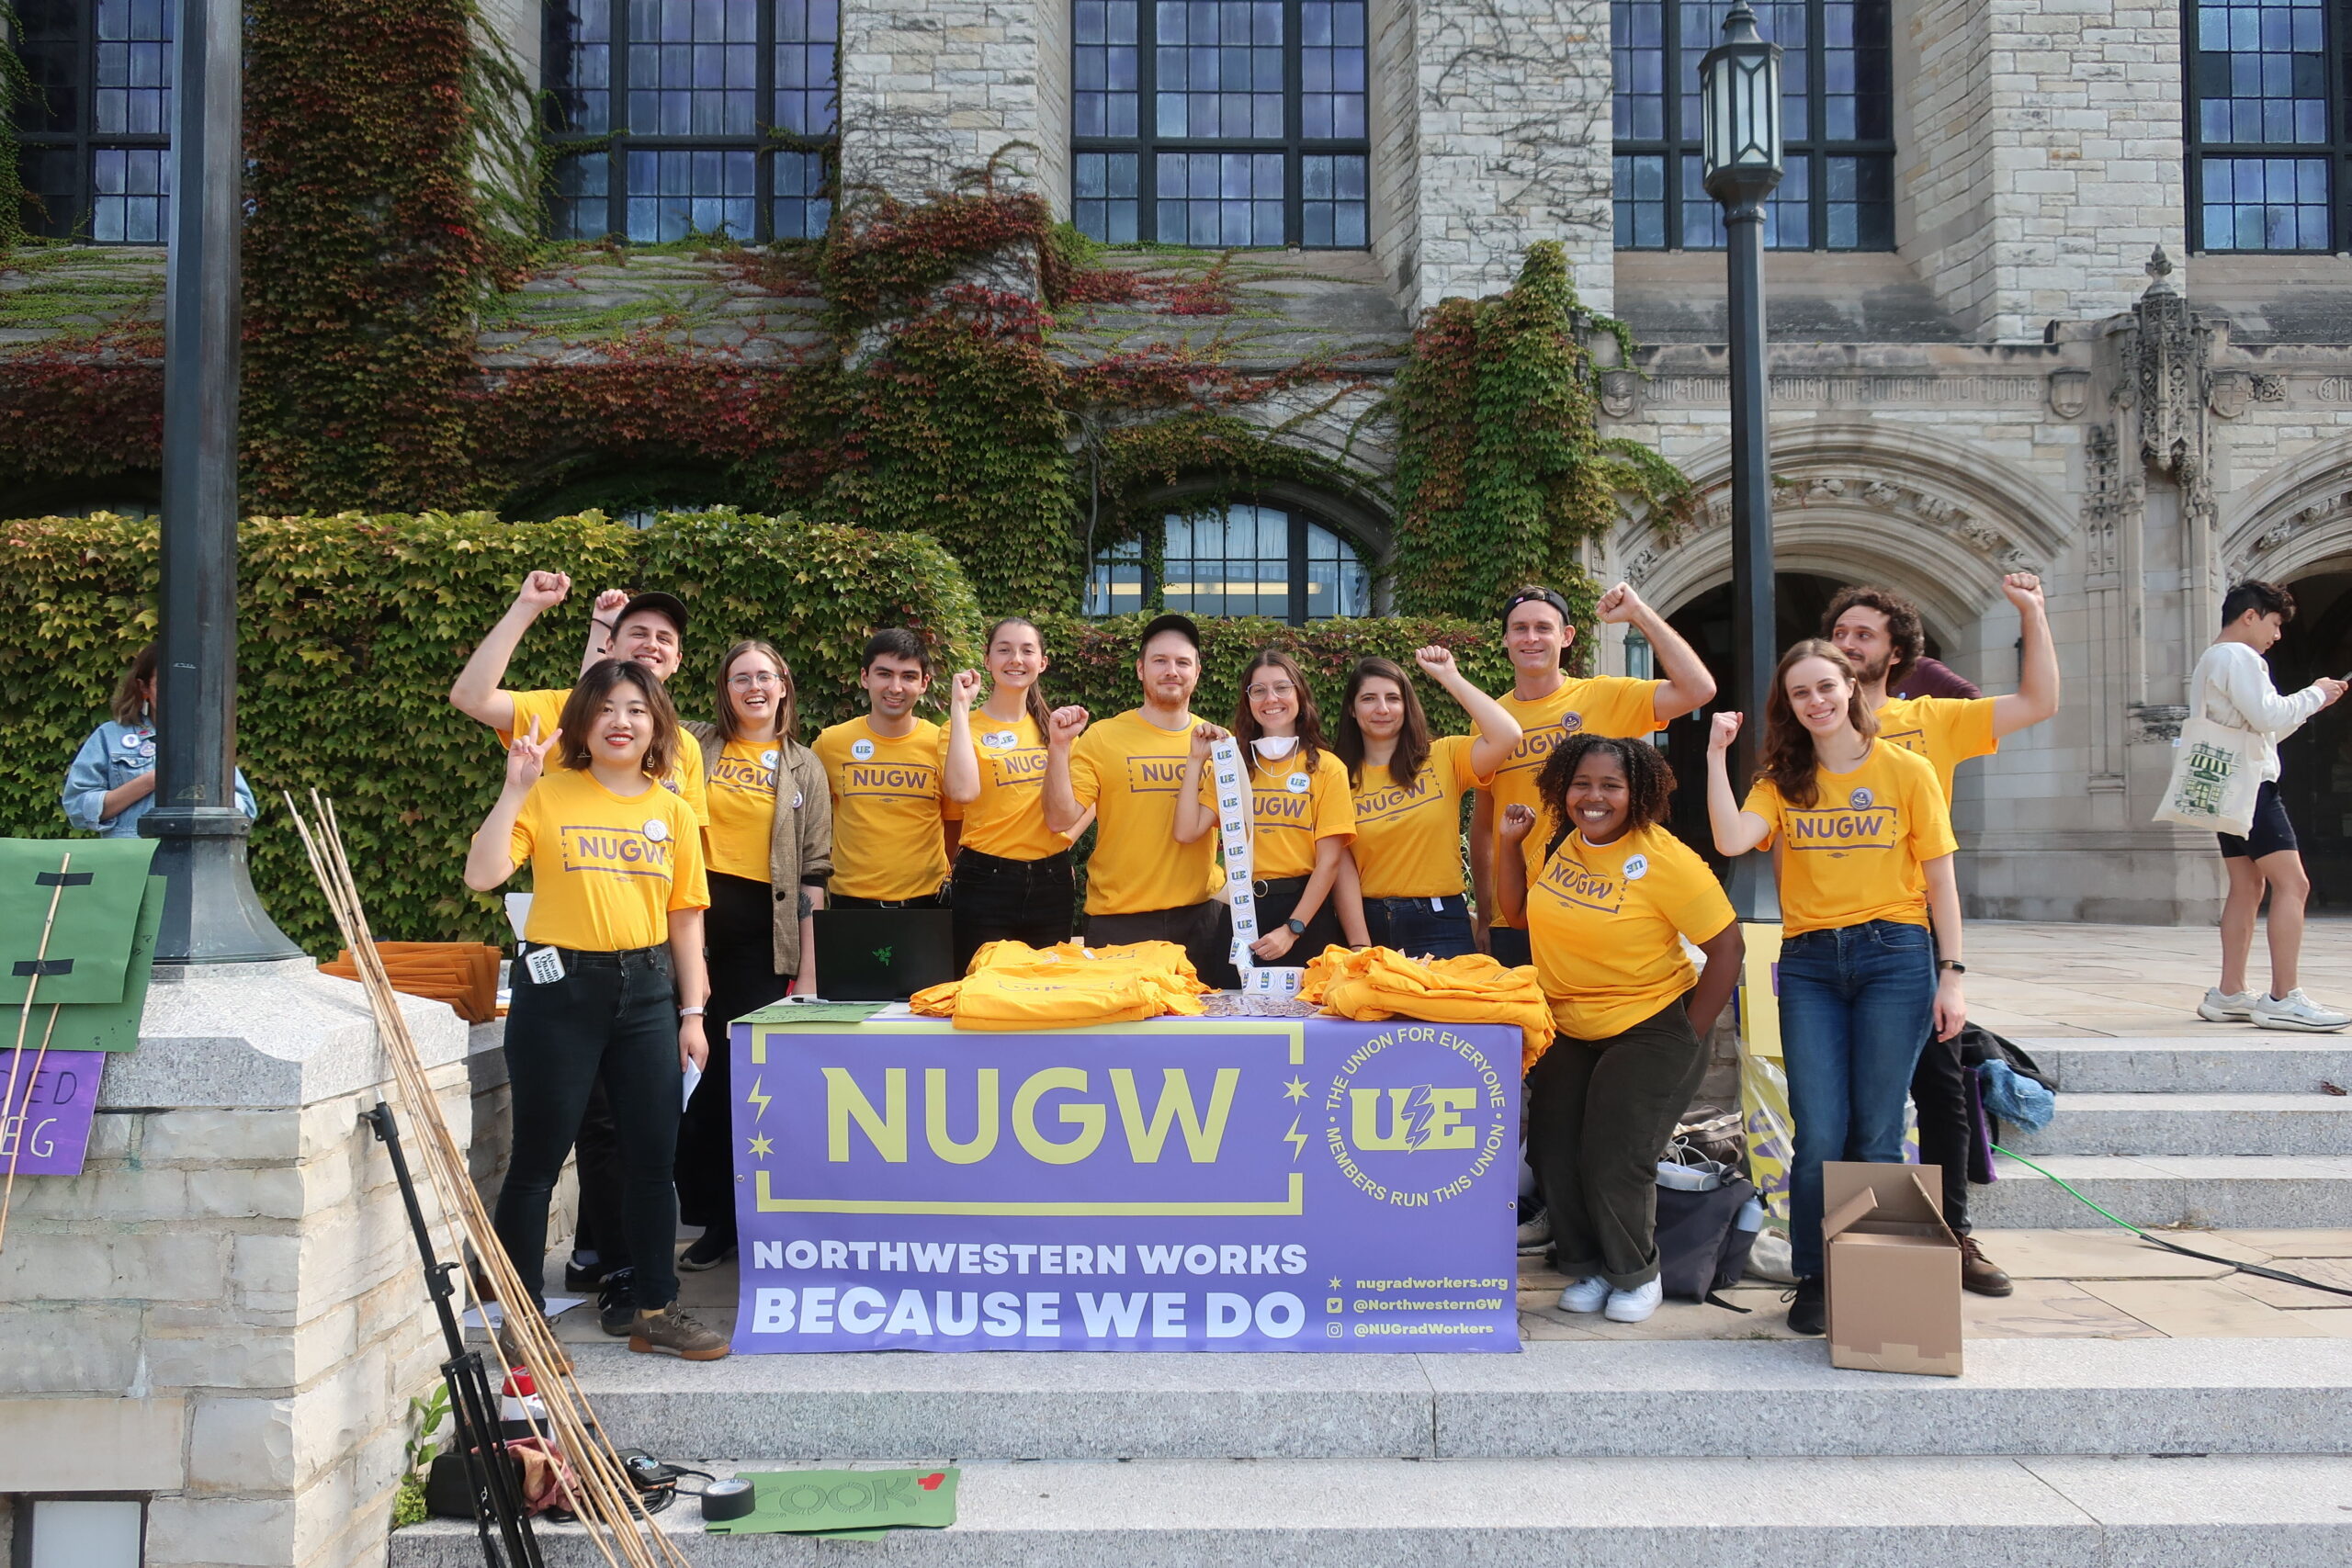 A group of 15 NUGW members stand in gold NUGW shirts in front of Deering Library. They are raising their fists in solidarity in front of an NUGW banner stating: NUGW, The University Works Because We Do!